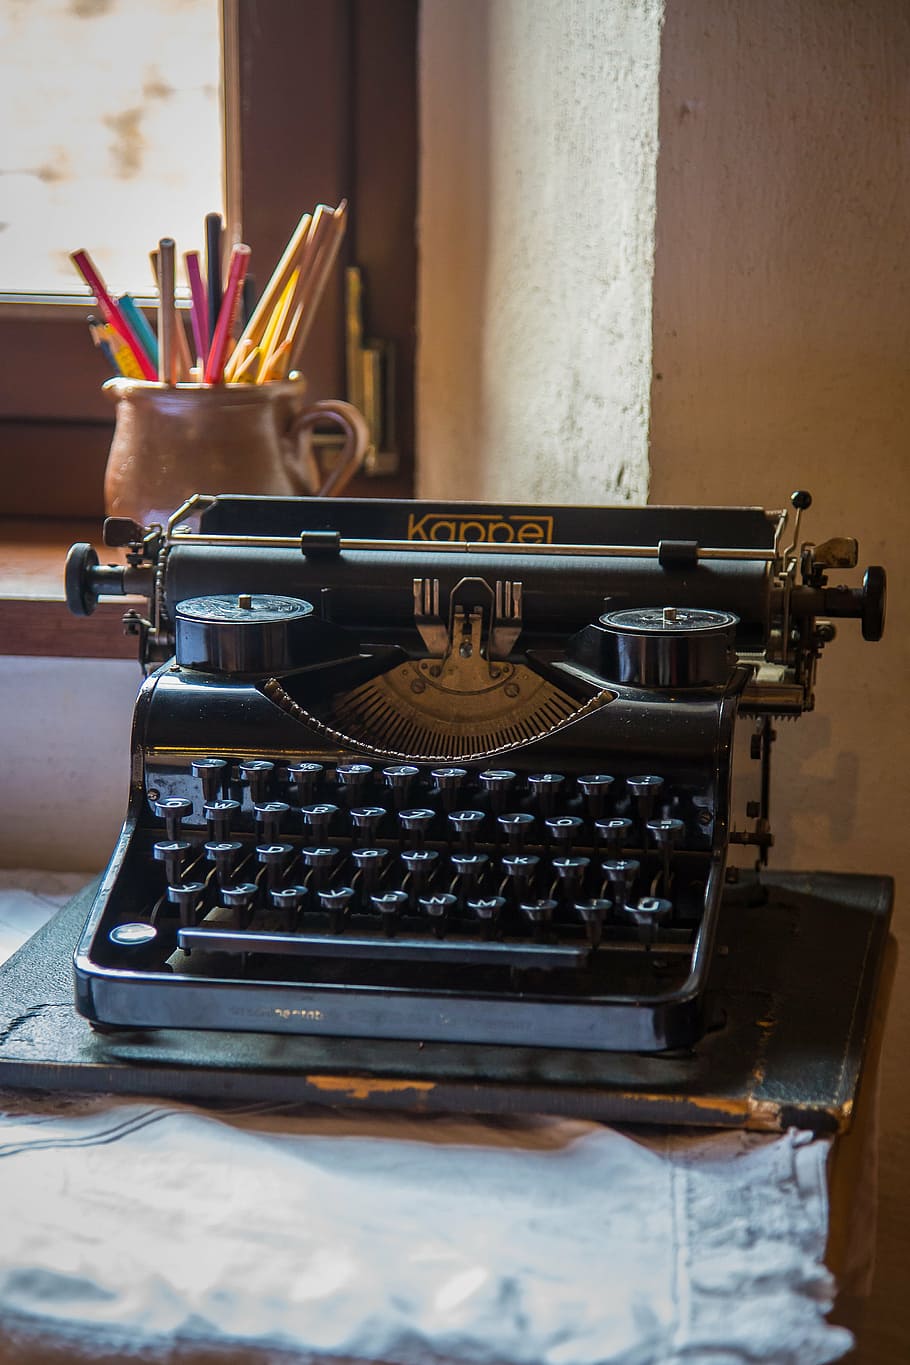 typewriter, leave, keys, tap, office appliance, historically, letters, stationery, indoors, table